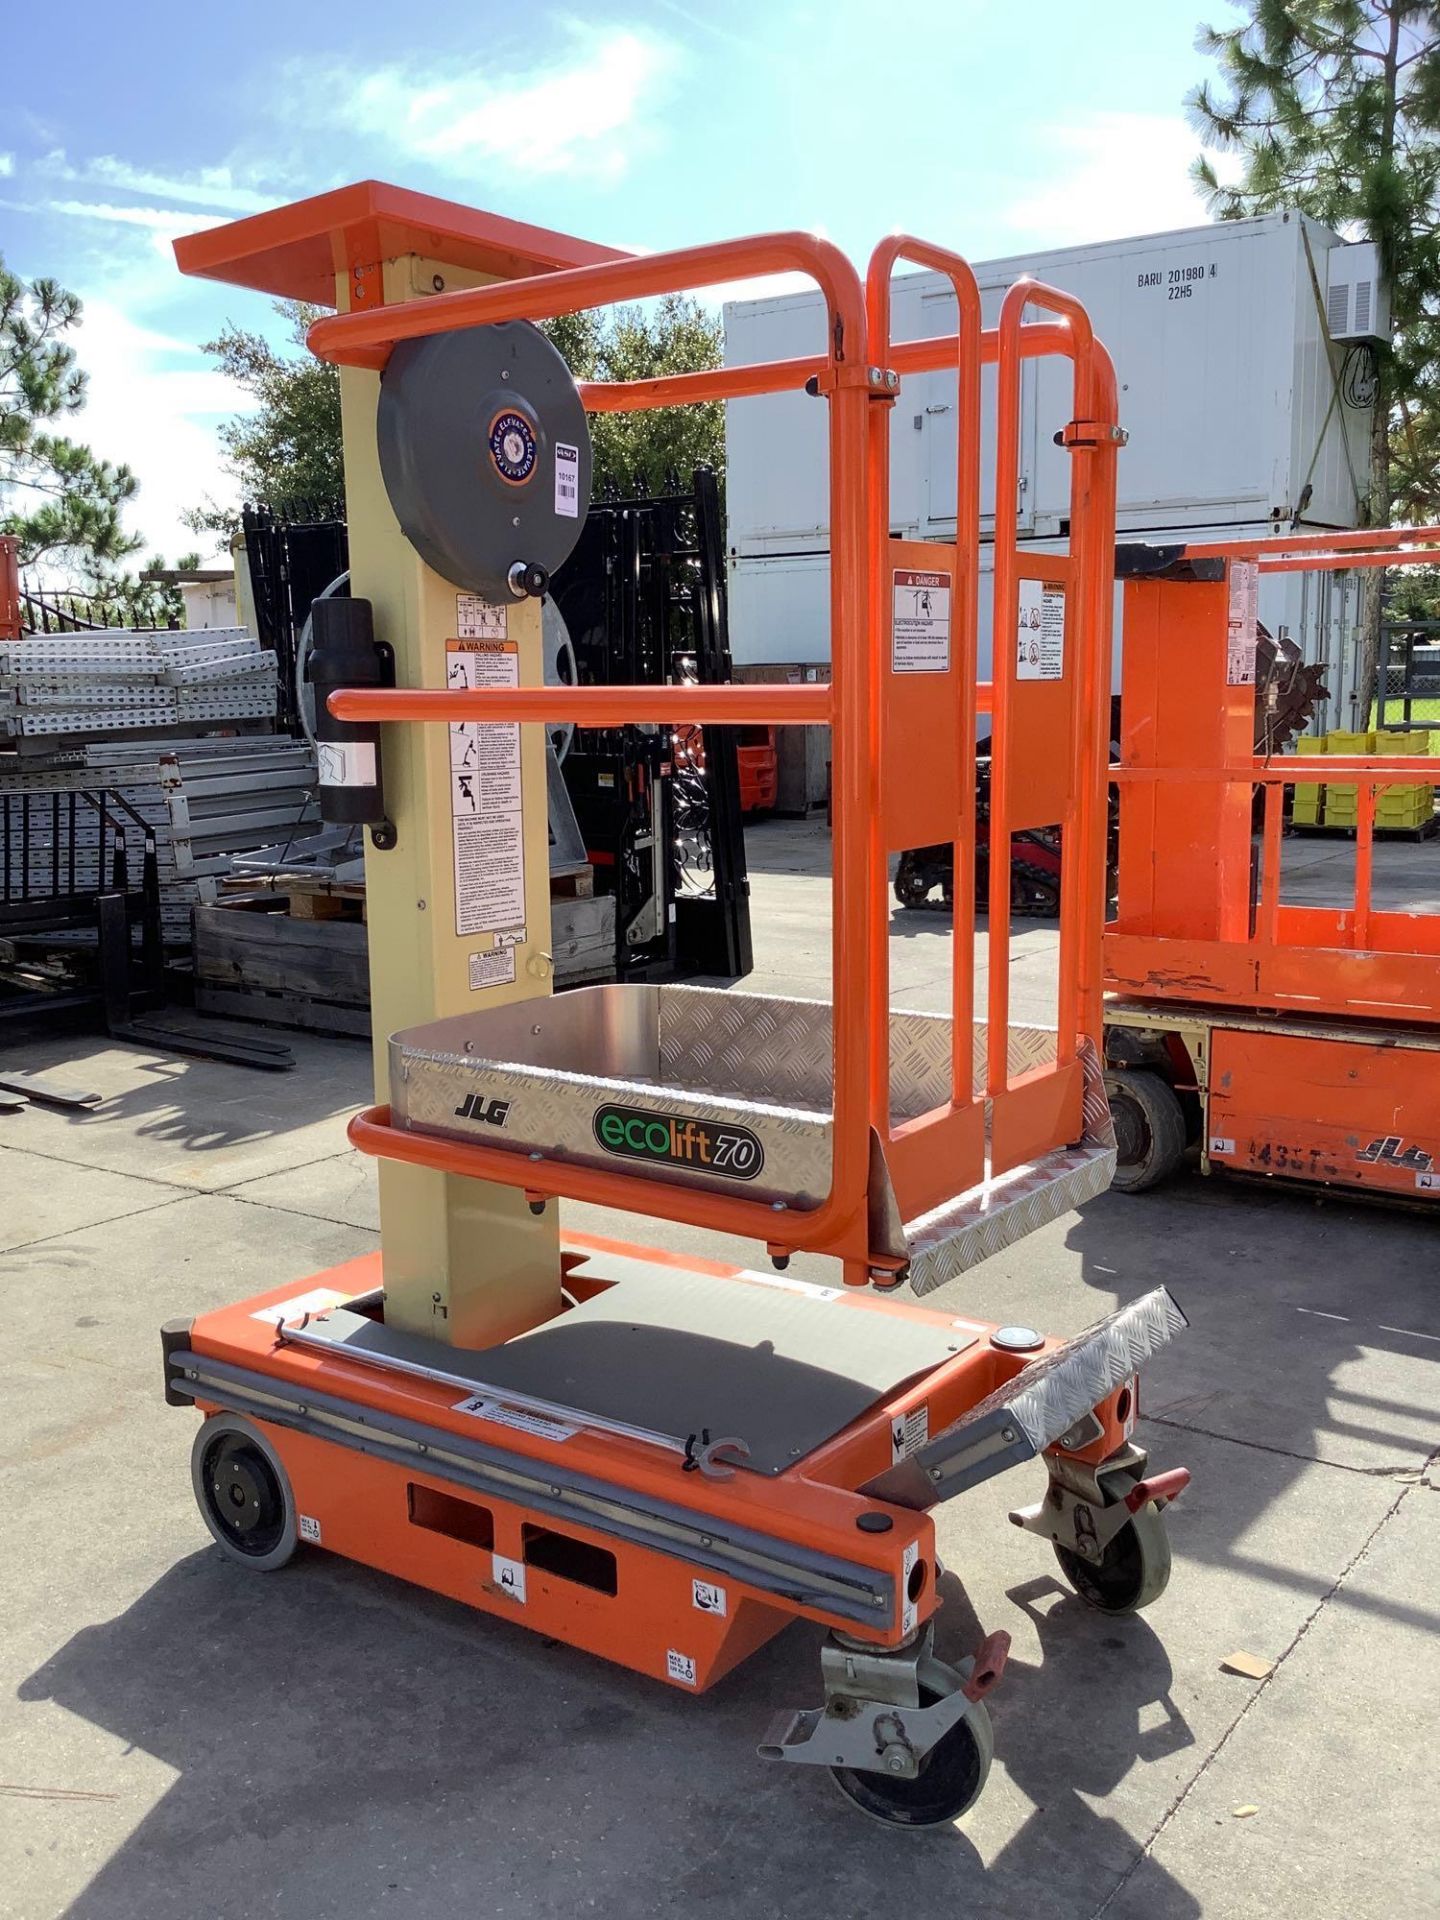 2018 JLG ECOLIFT 70,MANUAL, APPROX MAX PLATFORM HEIGHT 7FT, NON MARKING TIRES